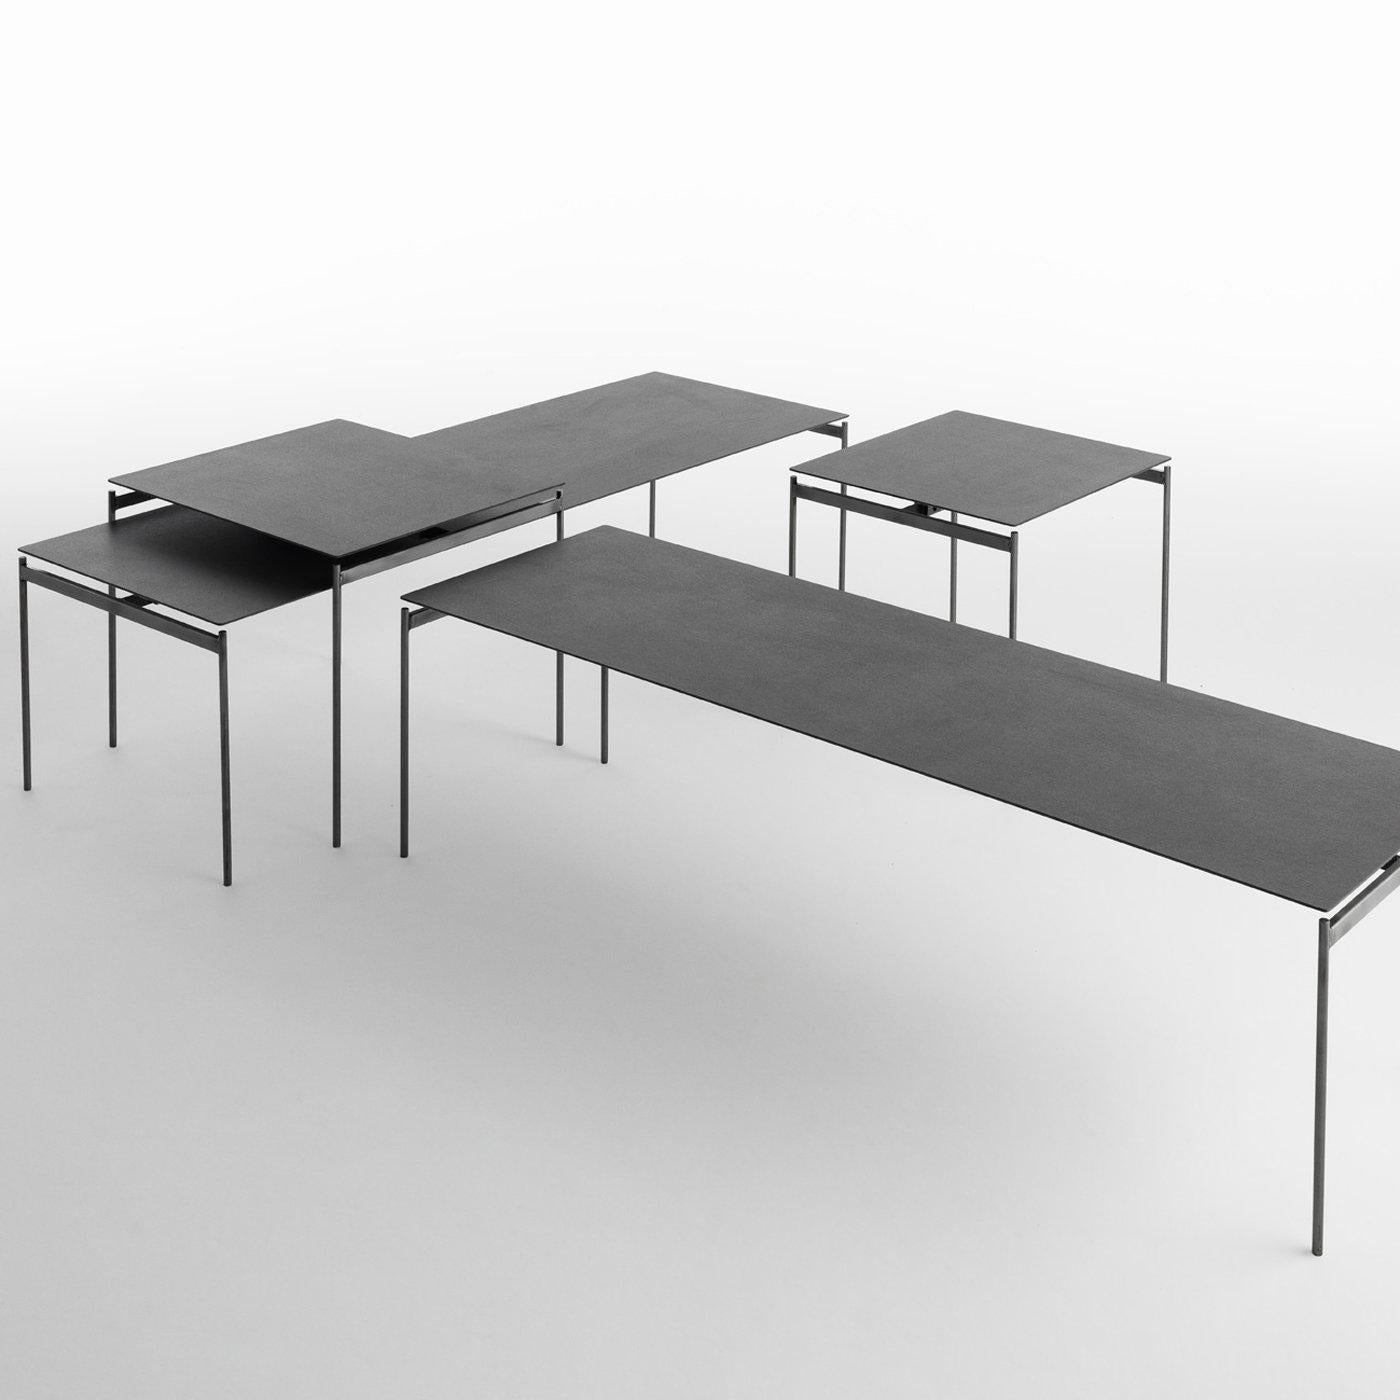 This set of two coffee tables is a minimal and sophisticated piece of functional decor designed by Renato Zamberlan boasting a post-industrial allure. Inspired by the Orient (a Torii is the traditional Japanese gateway that leads to a Shinto shrine